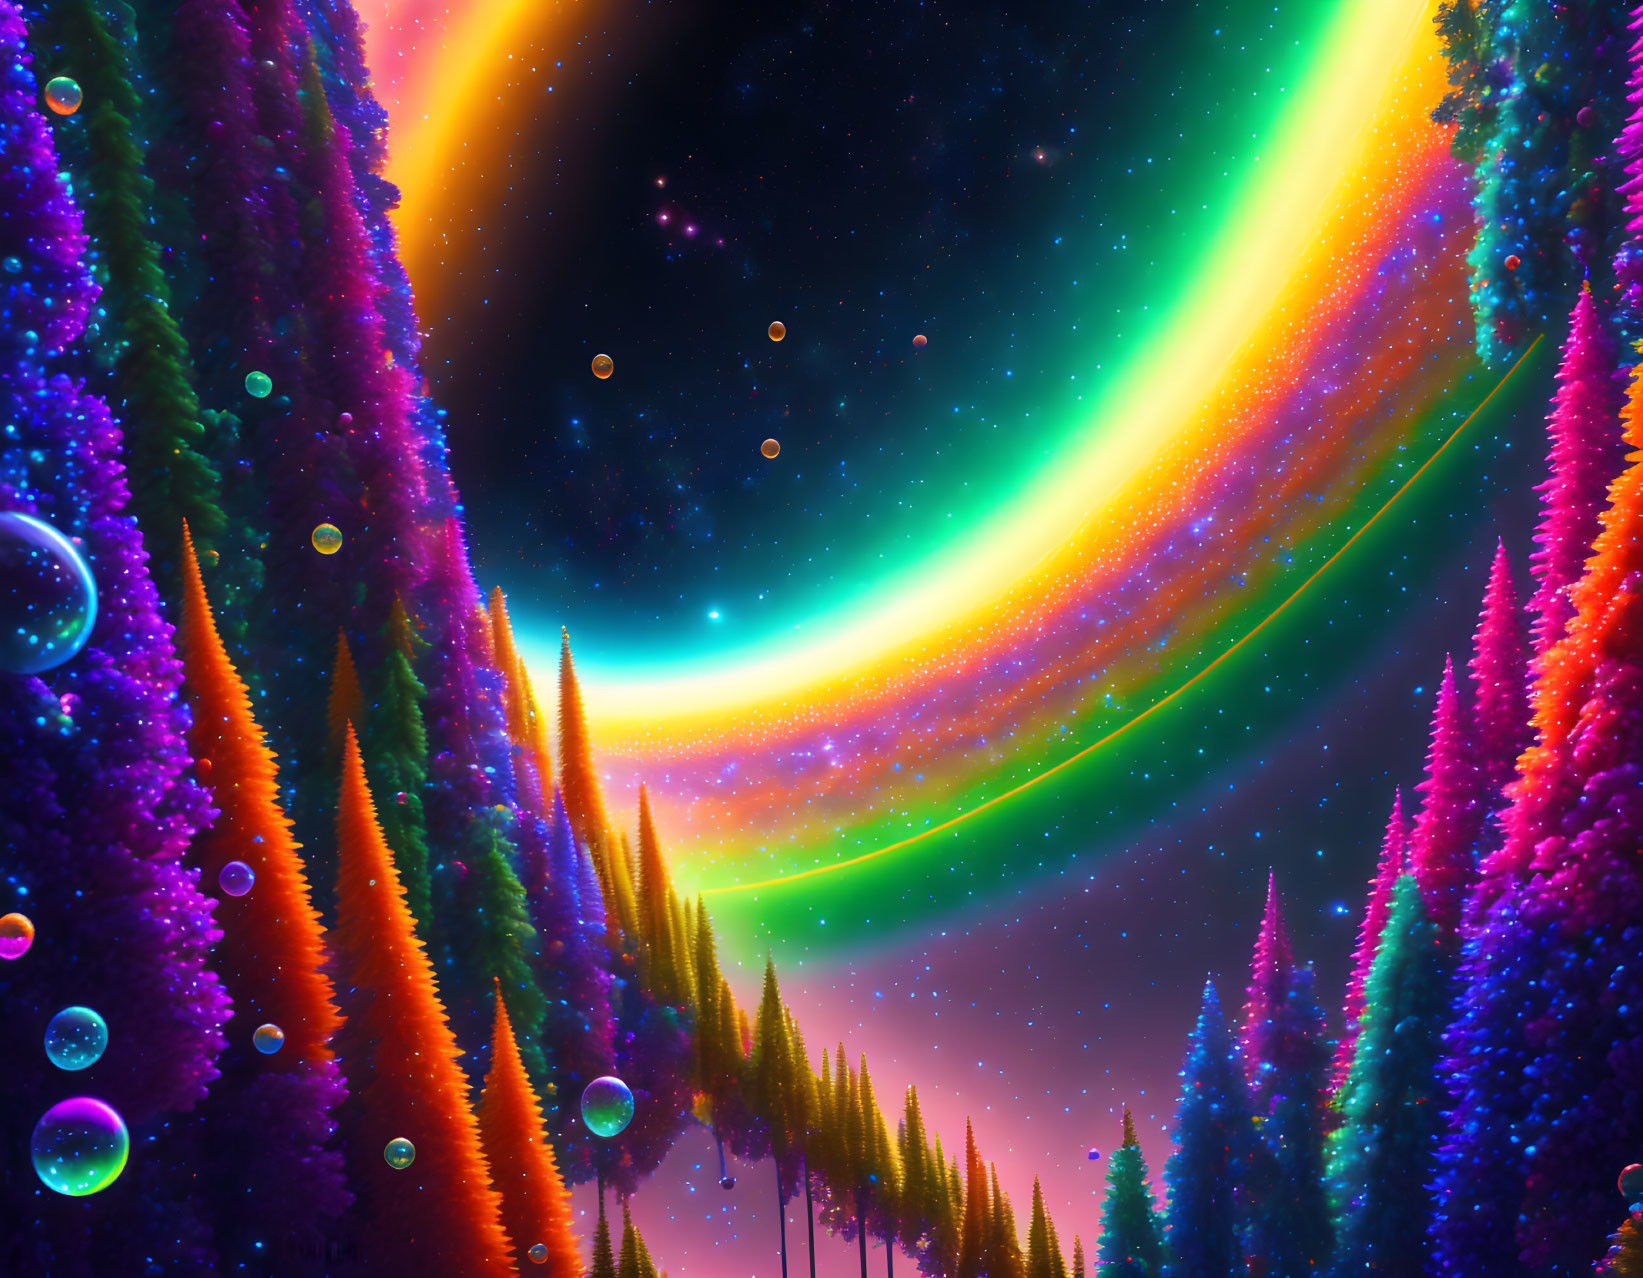 Surreal landscape with iridescent trees, cosmic sky, and floating bubbles